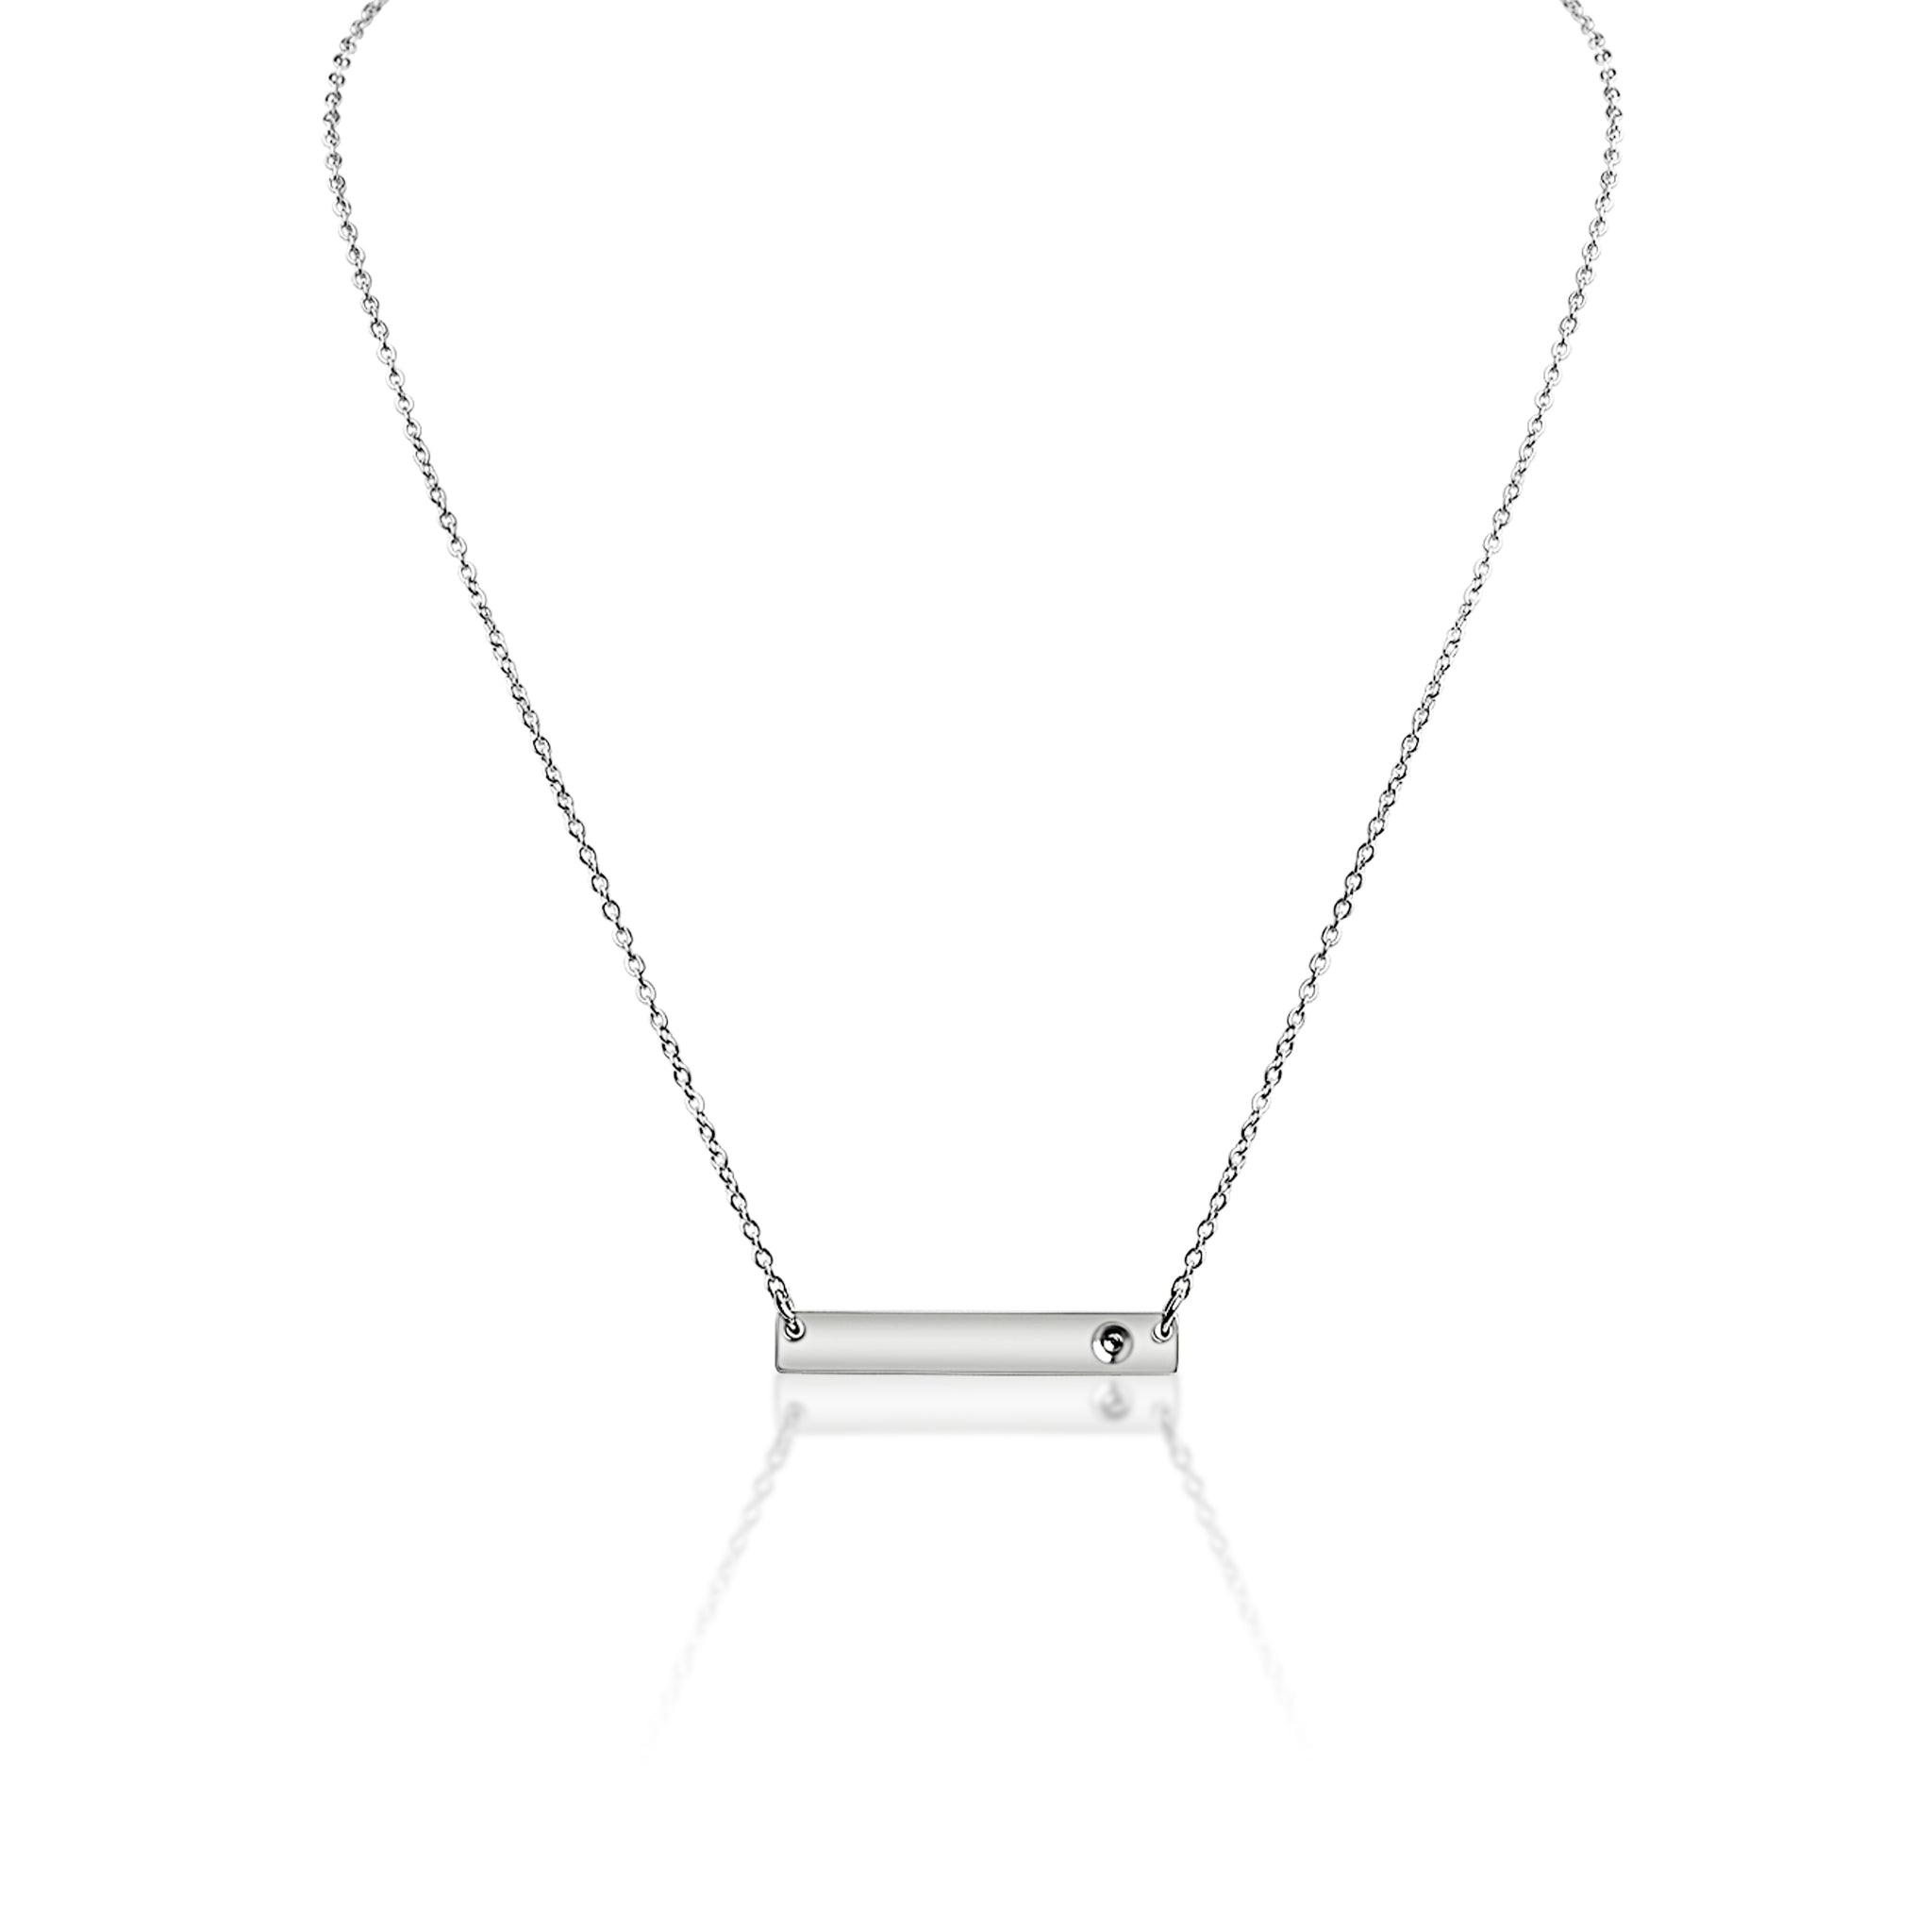 Polished Stainless Steel Stampable Necklace Sbb00114 – Wholesale ...